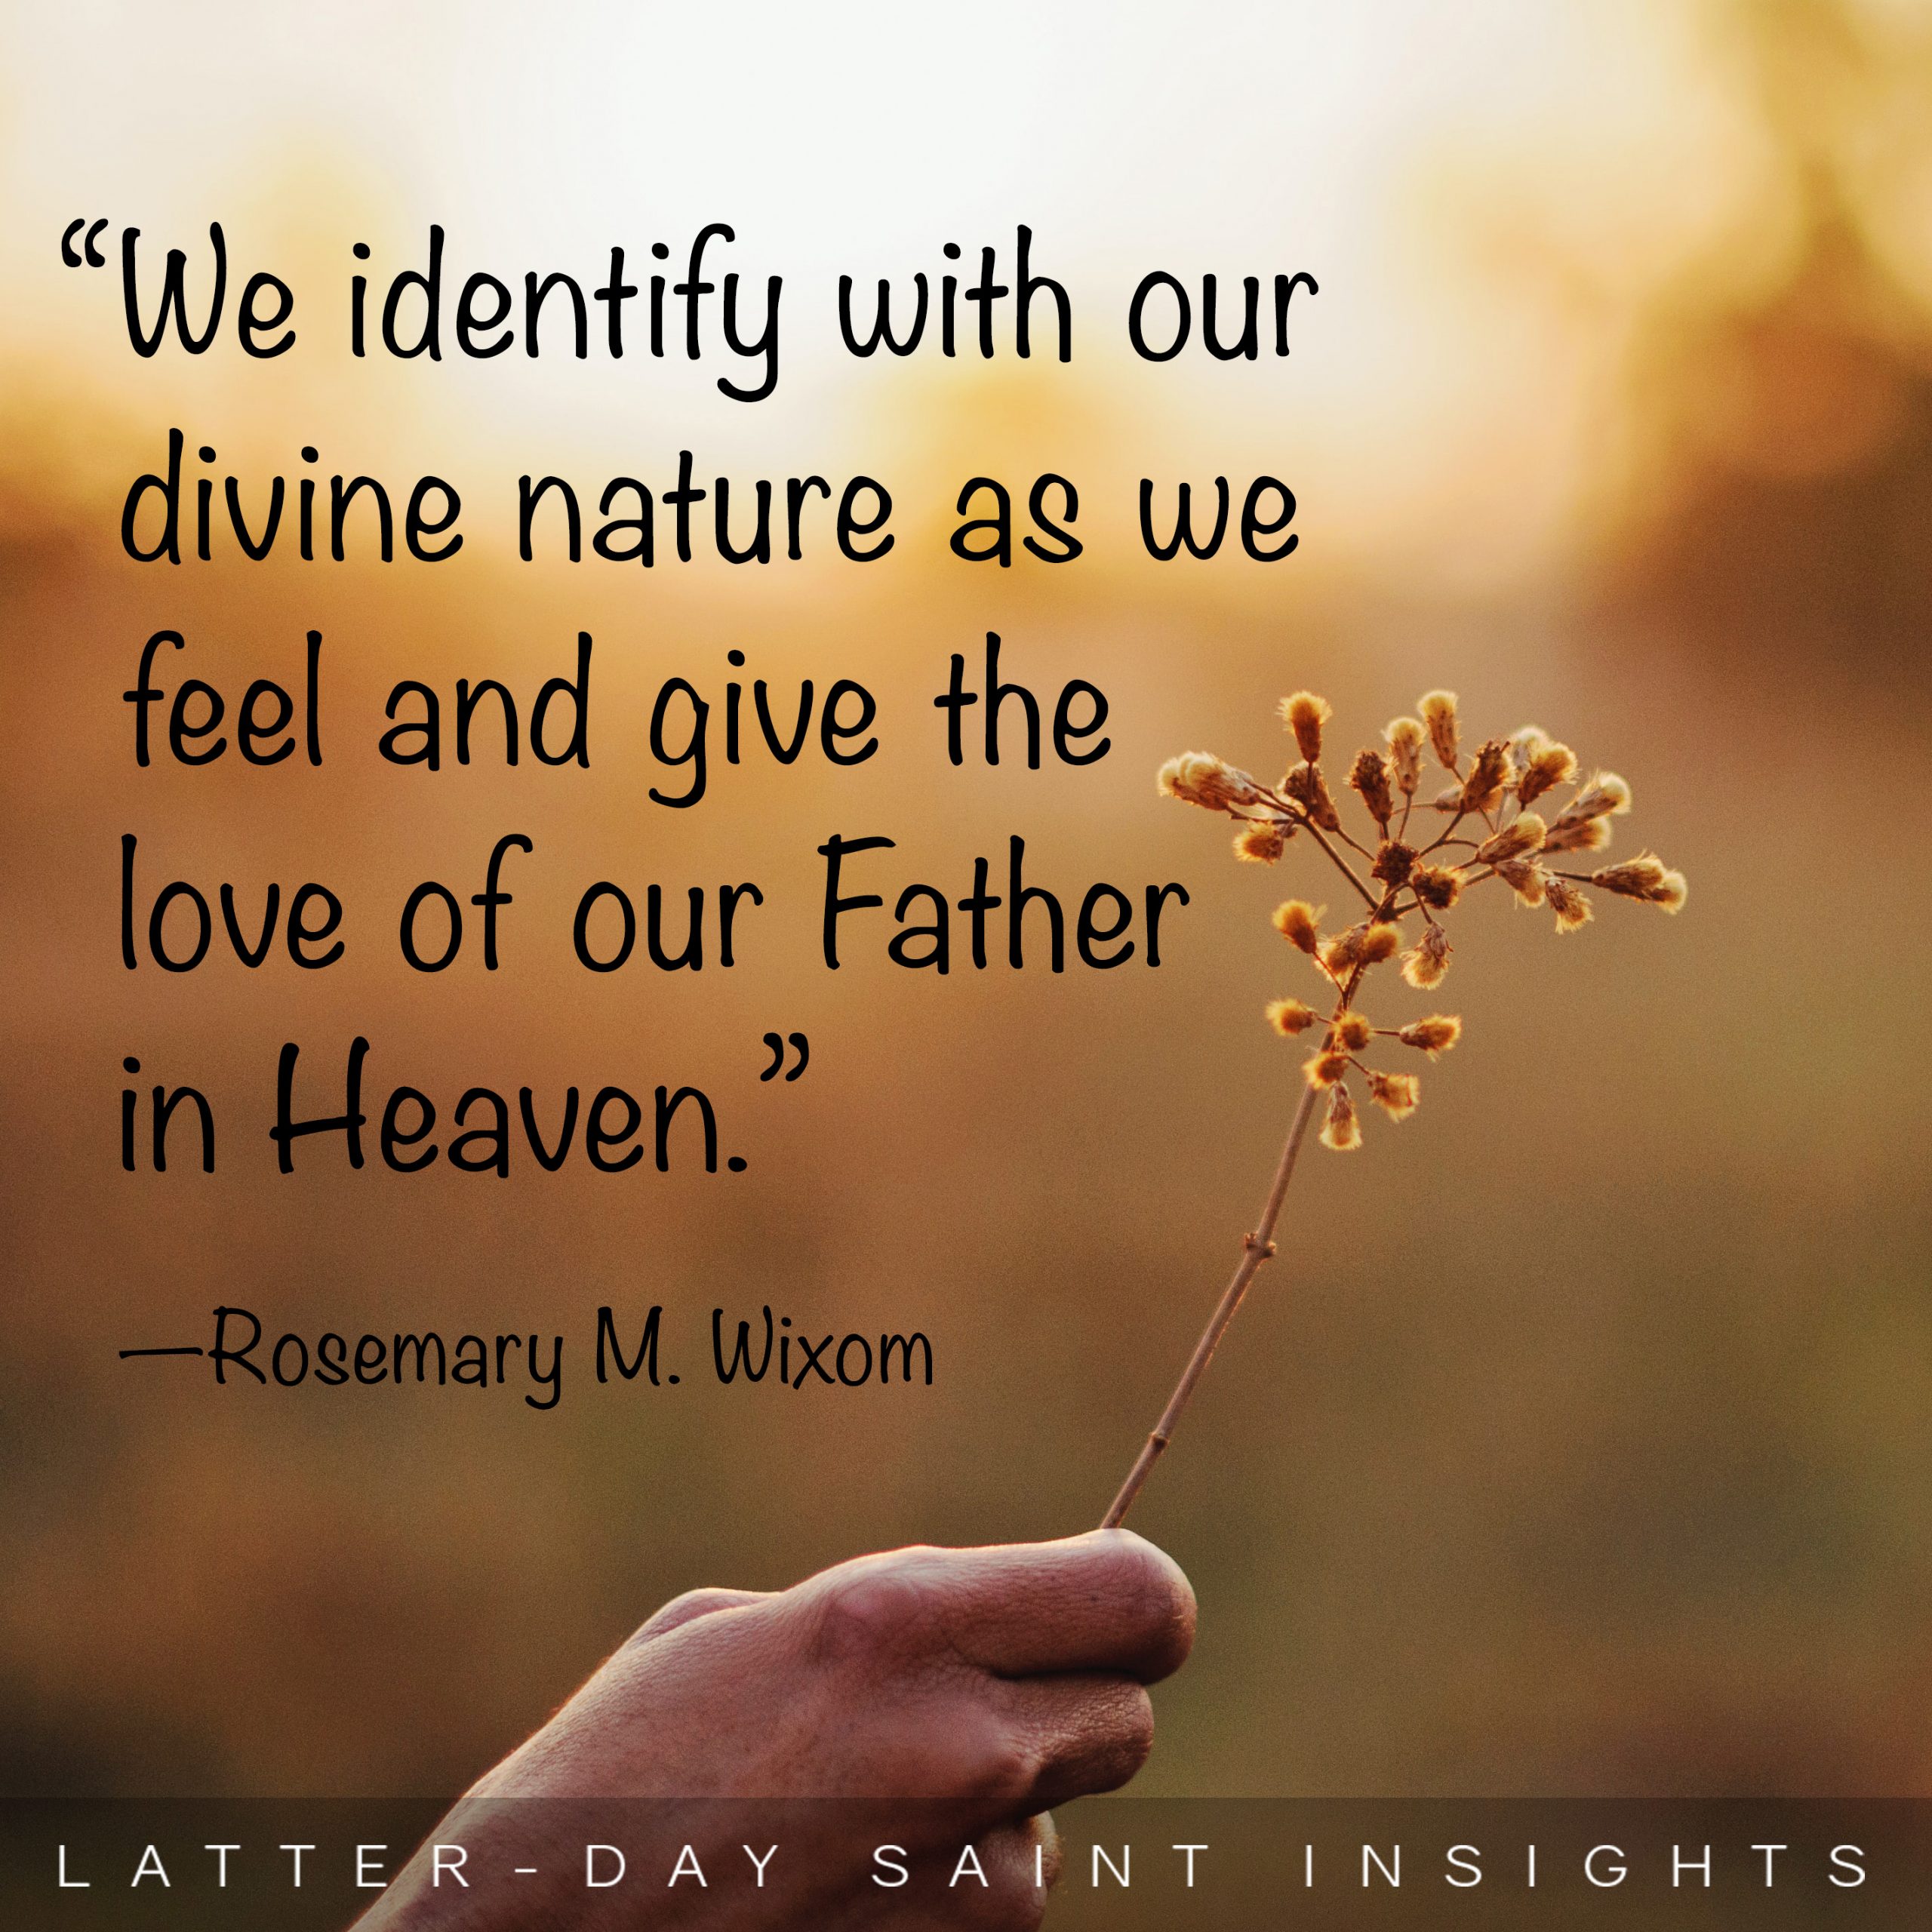 "We identify with our divine nature as we feel and give the love of our Father in Heaven." -Rosemary M. Wixom